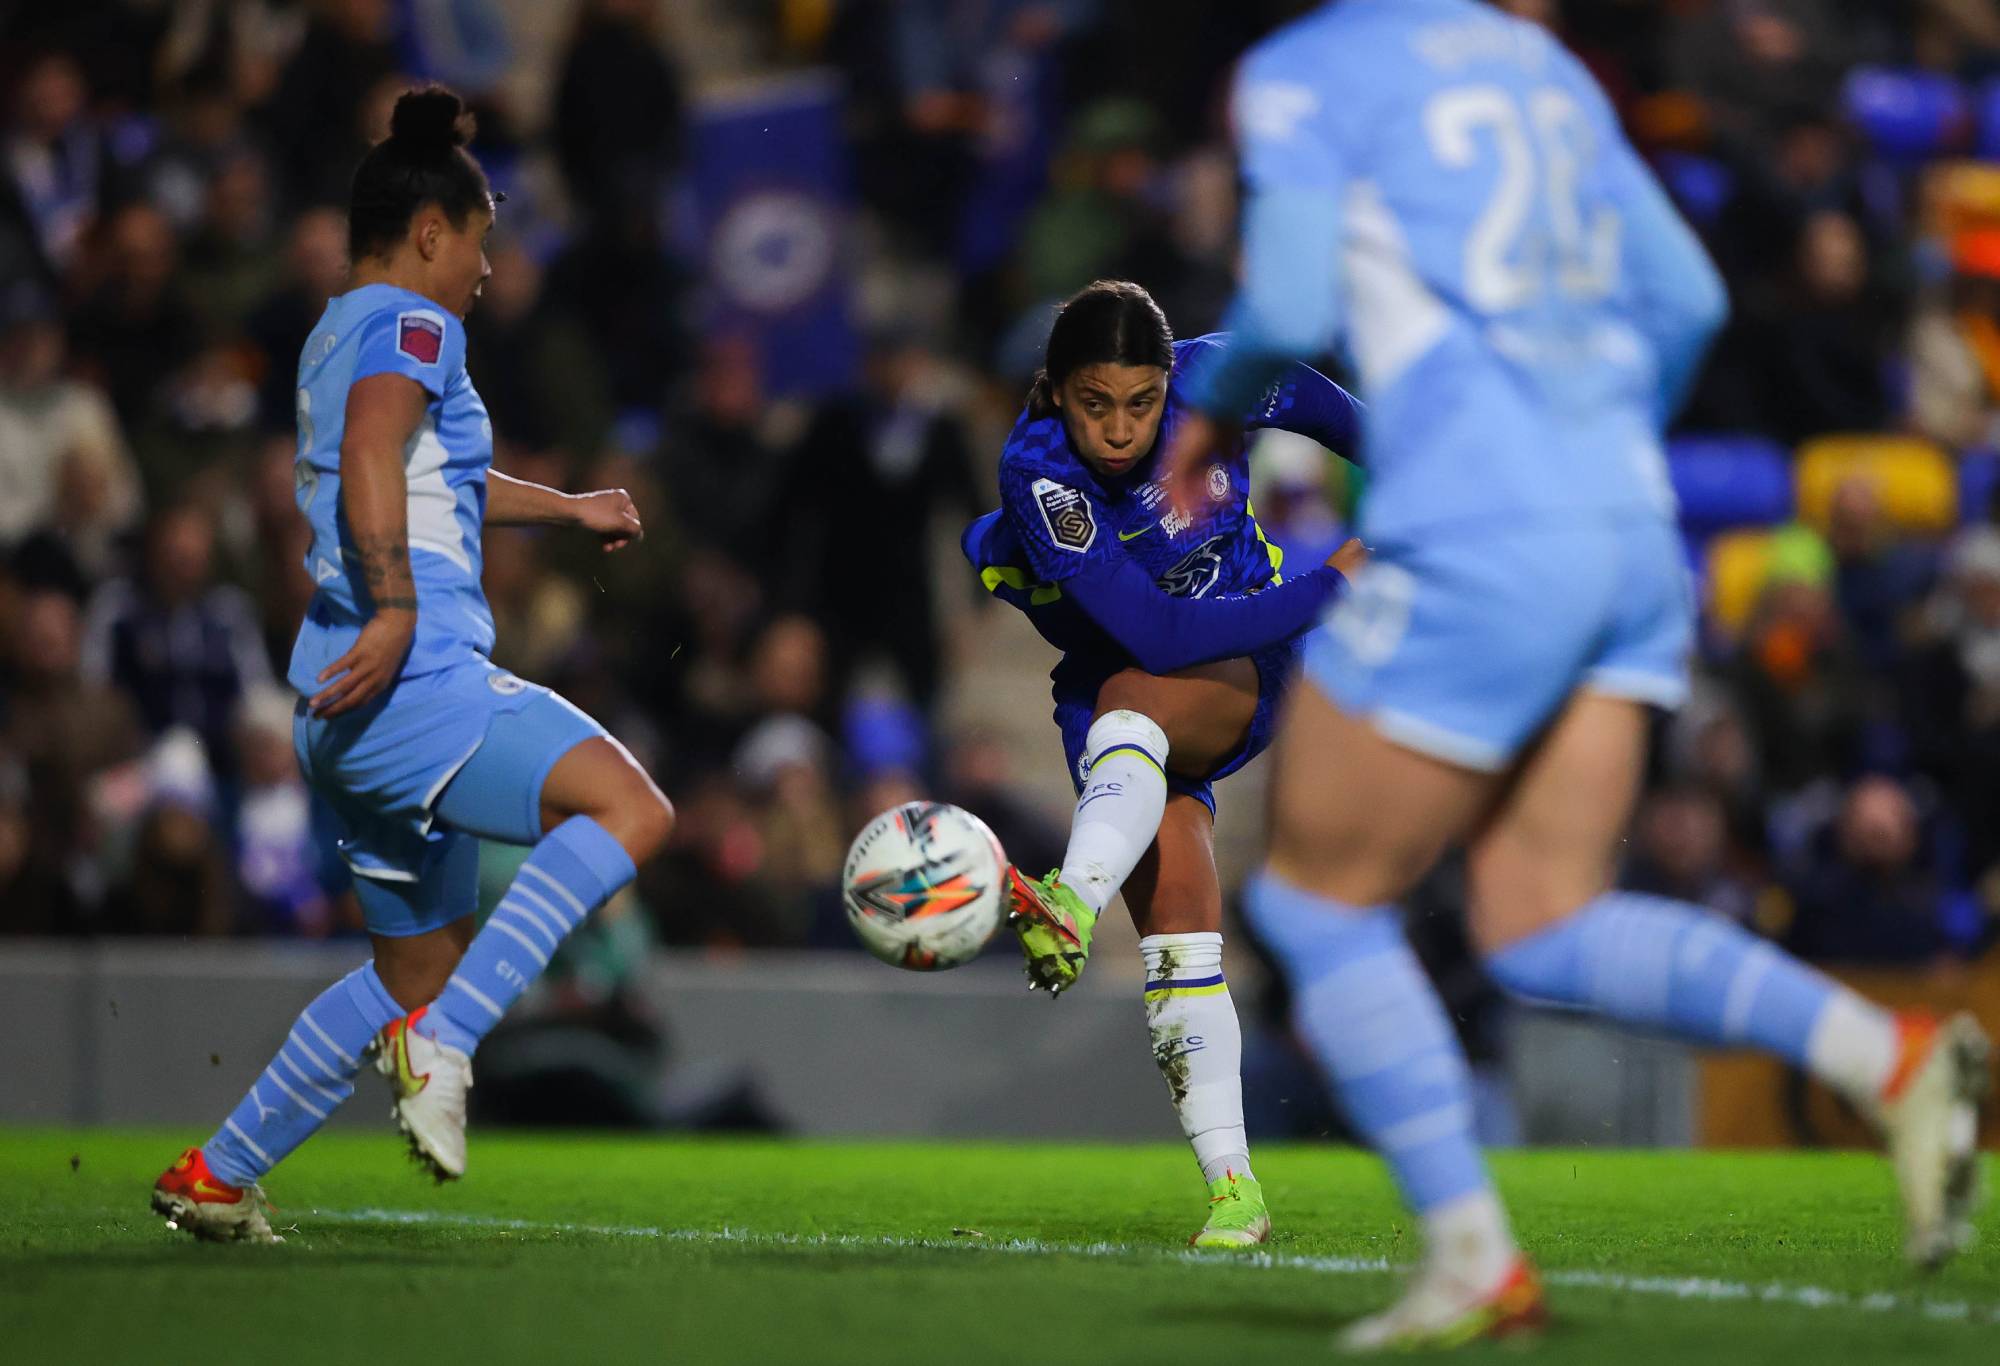 Sam Kerr of Chelsea Women scores her side's first goal during the FA Women's Continental Tyres League cup final match between Chelsea women and Manchester City women at The Cherry Red Records Stadium on March 05, 2022 in Wimbledon, England. (Photo by James Gill - Danehouse/Getty Images)